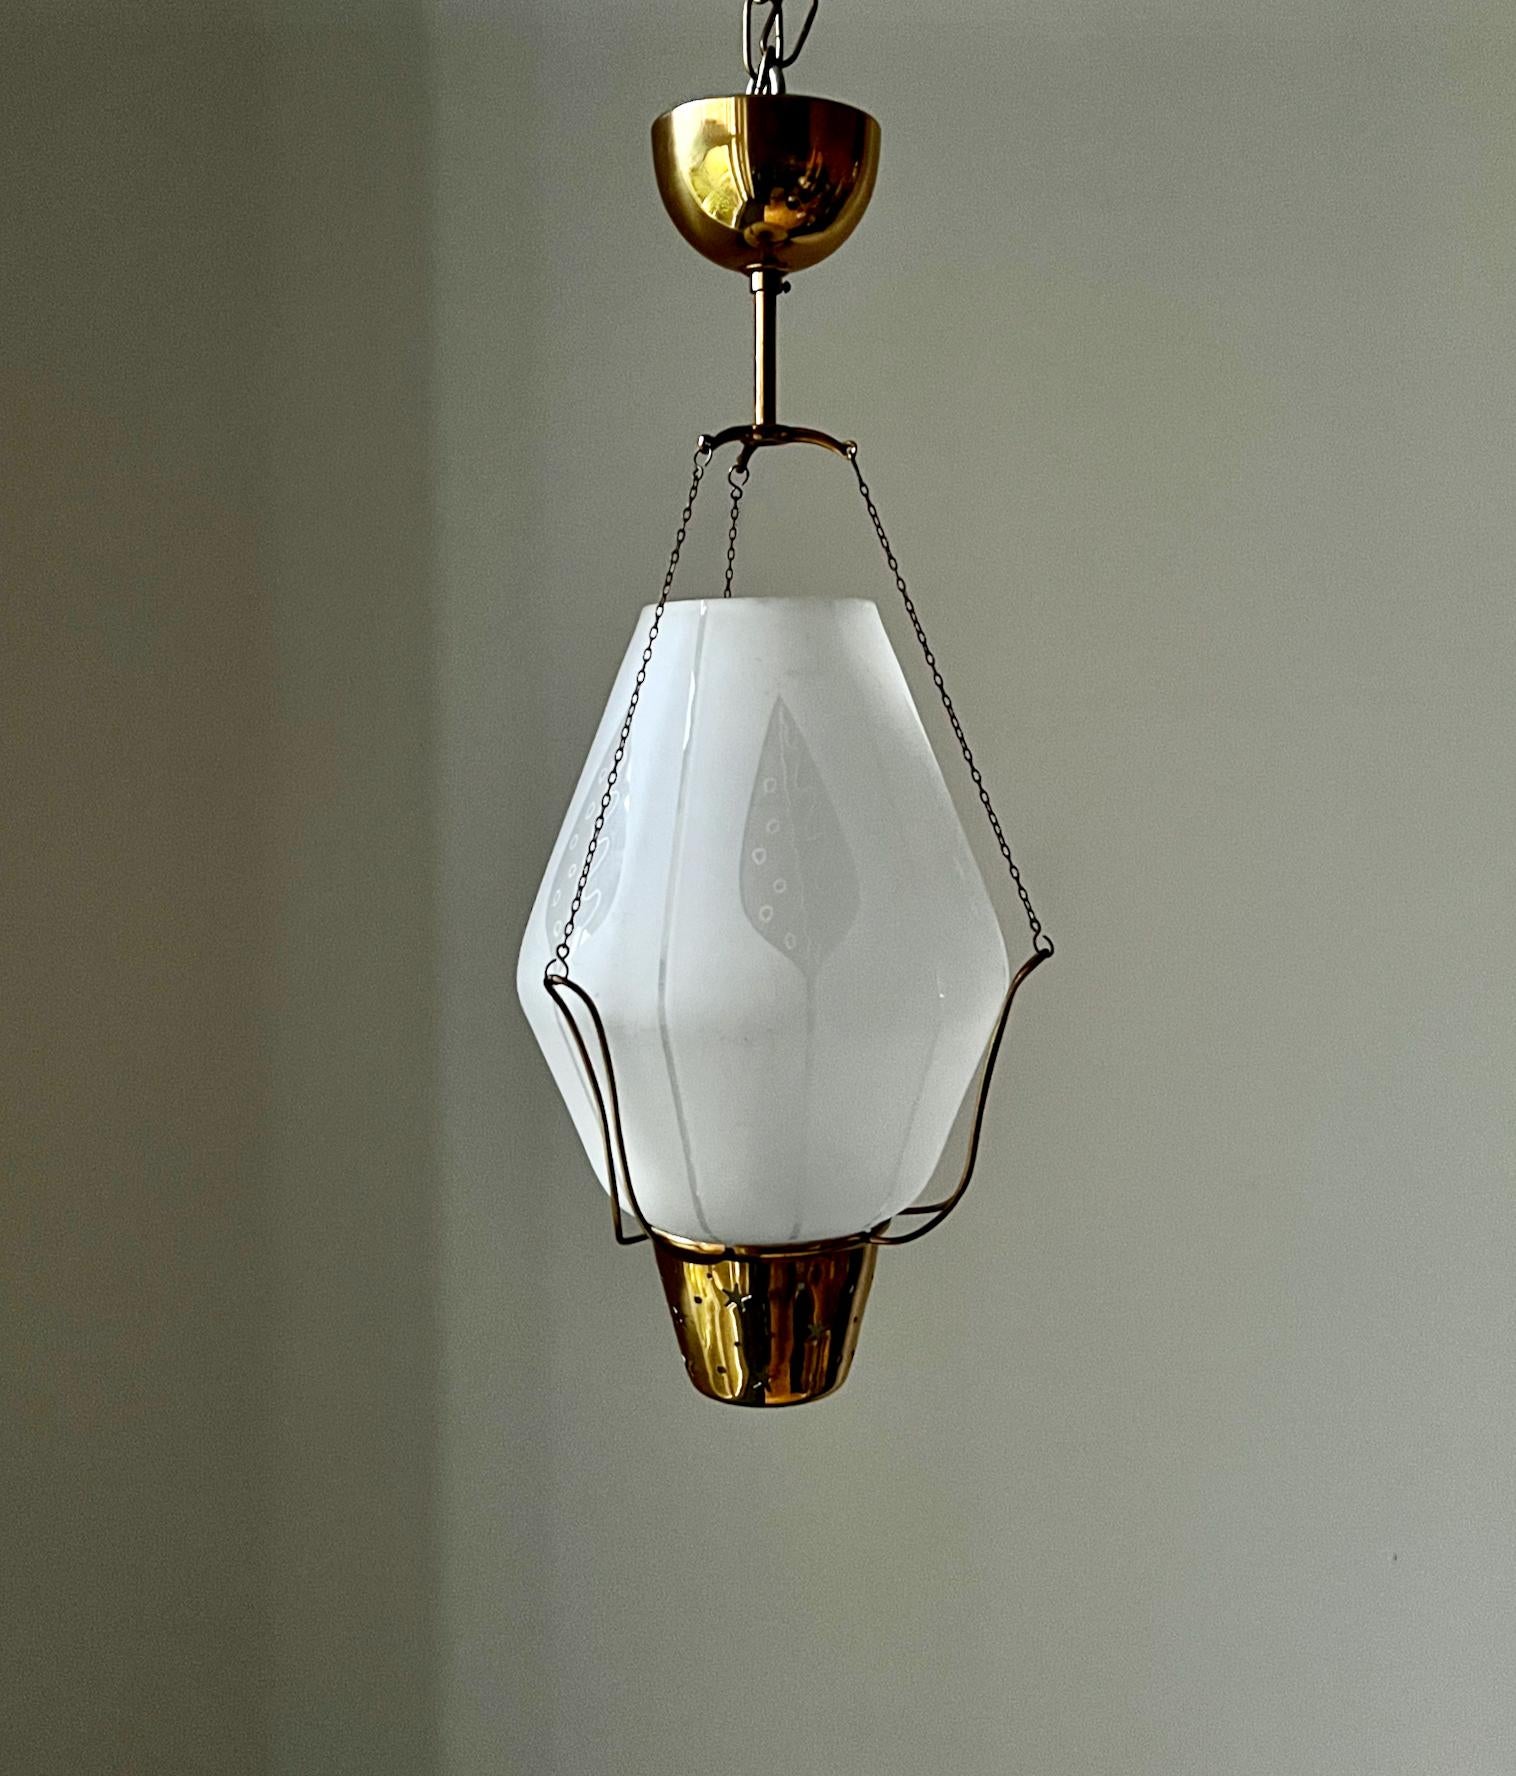 A Swedish brass pendant light with etched glass shade and openwork details. Mid-20th century, designer unknown.

A nicely made piece with a thick glass shade held by a brass frame and three delicate loops and chains. Simple leaf designs are etched